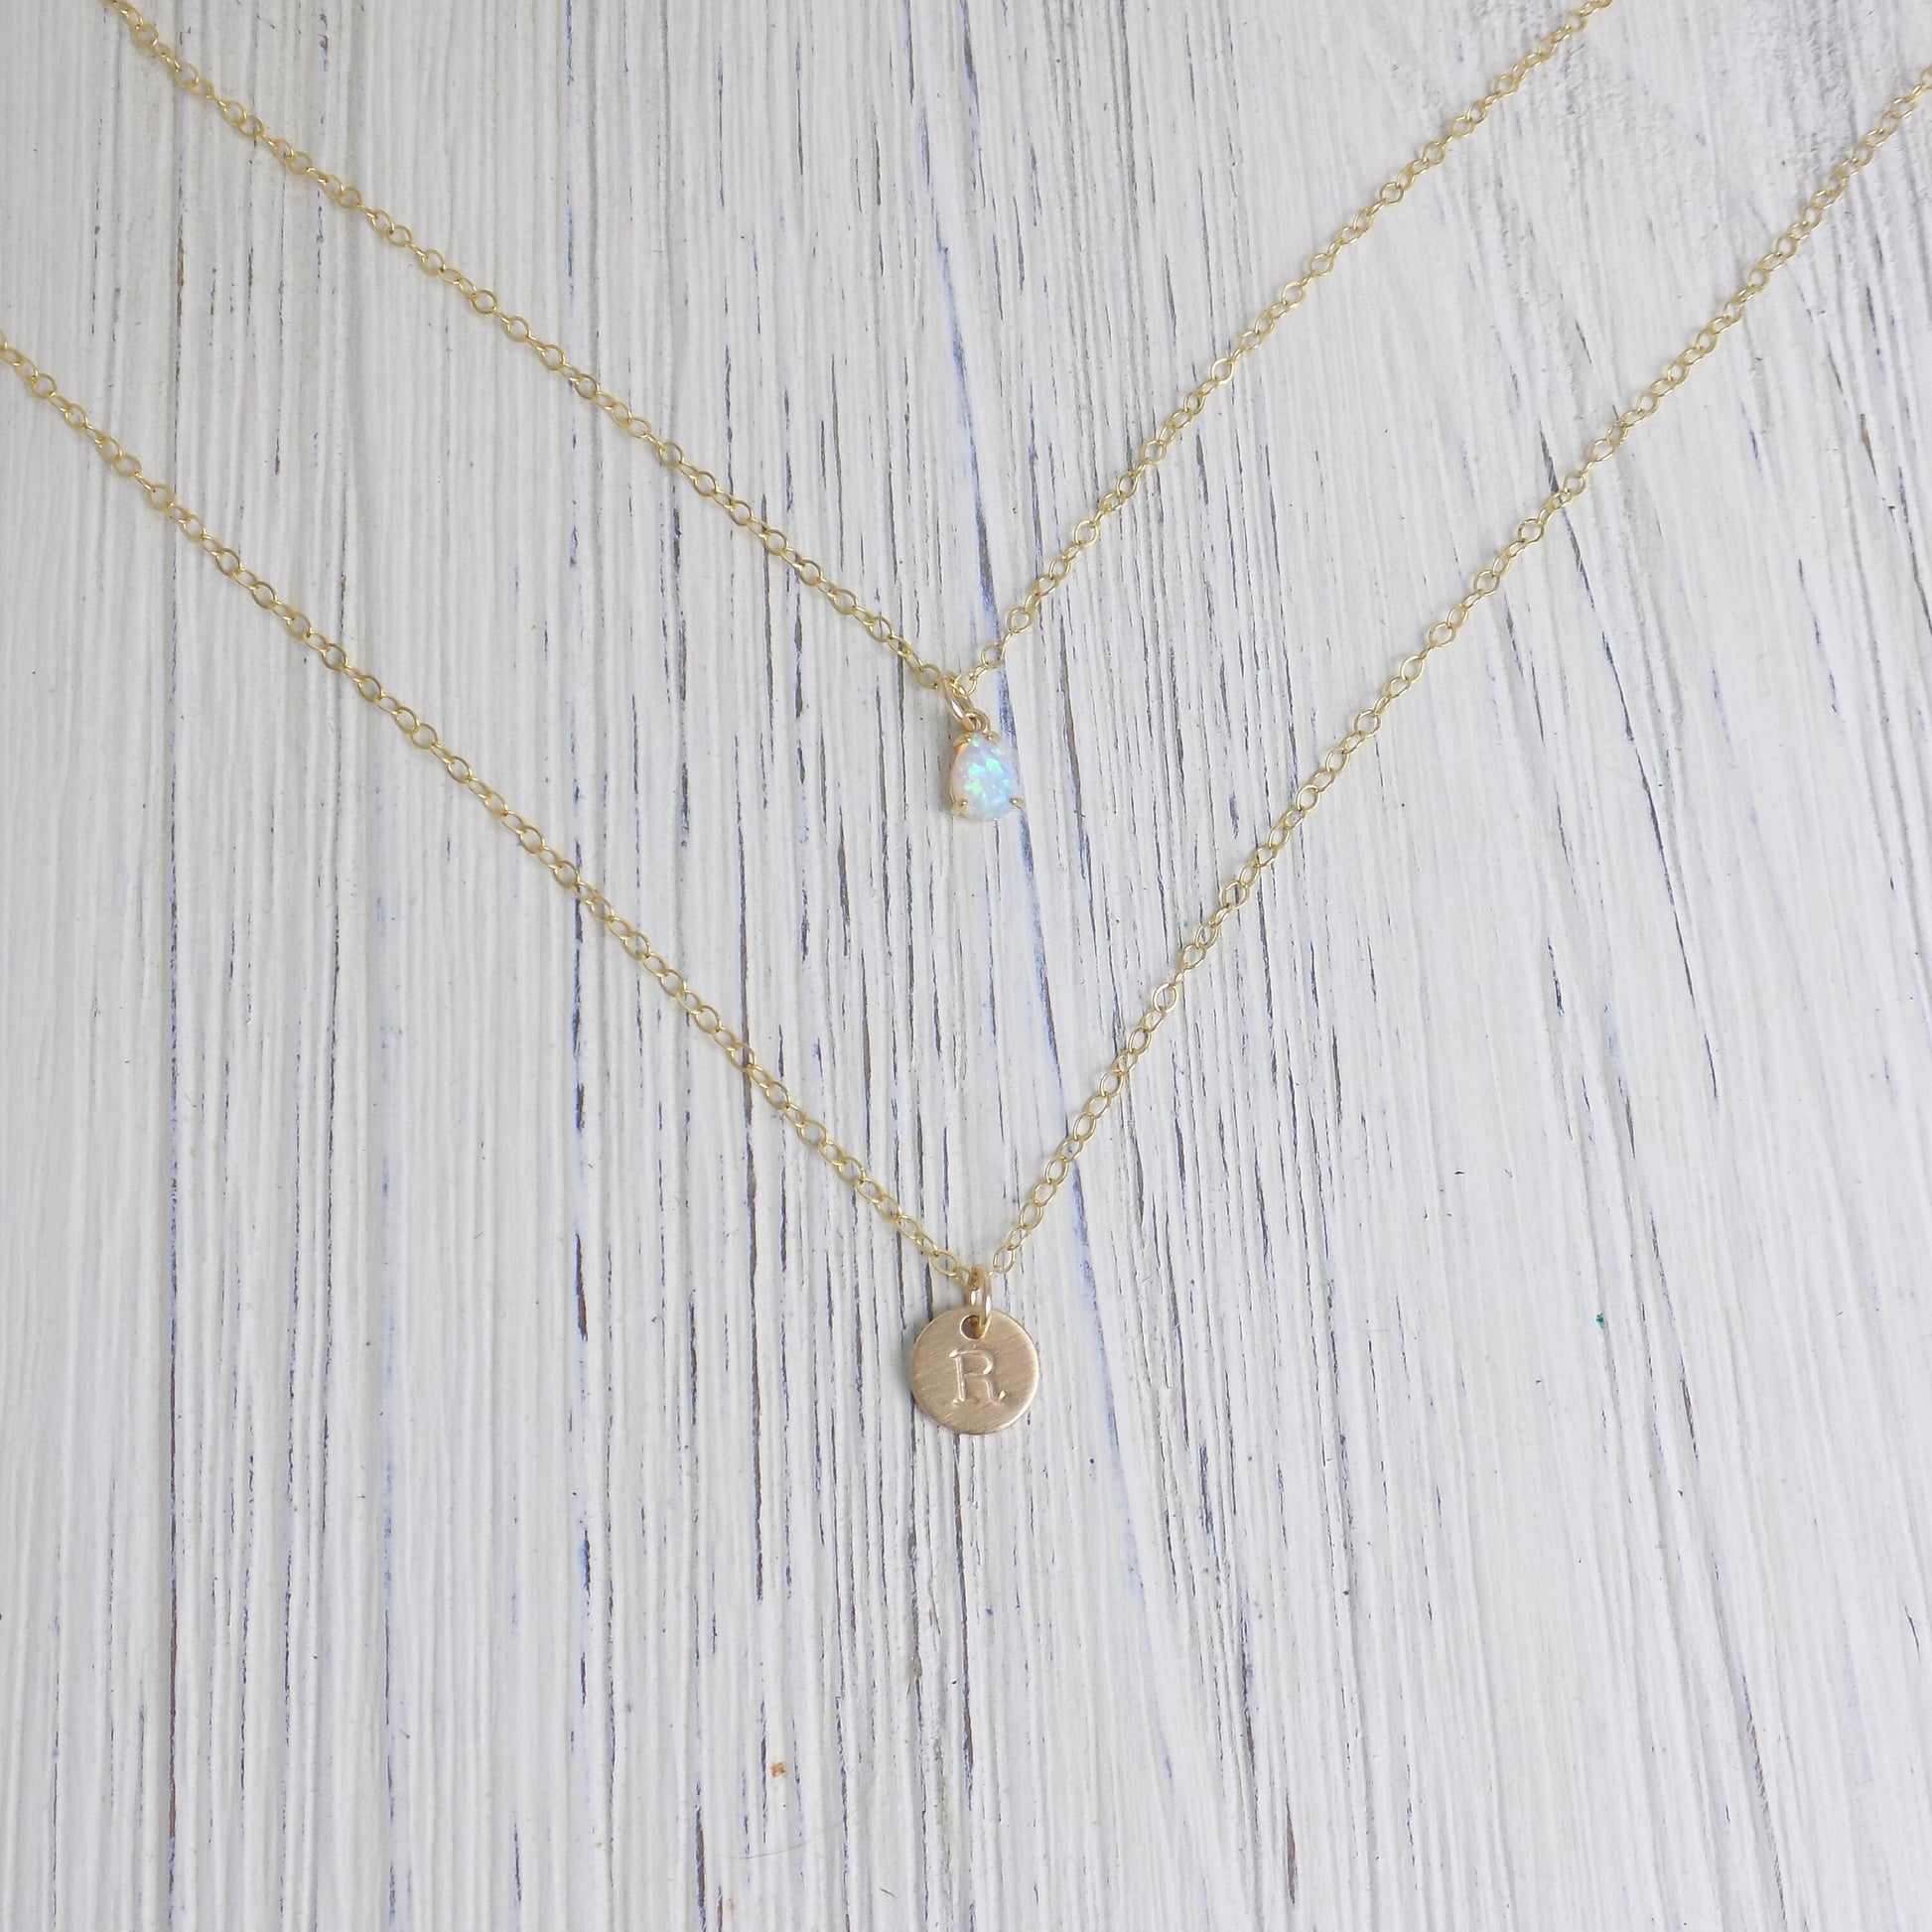 Initial Layered Necklaces - Dainty Opal Necklace October Birthstone Gift - Brushed Matte Satin Finish 14K Gold Filled - Personalized Initial